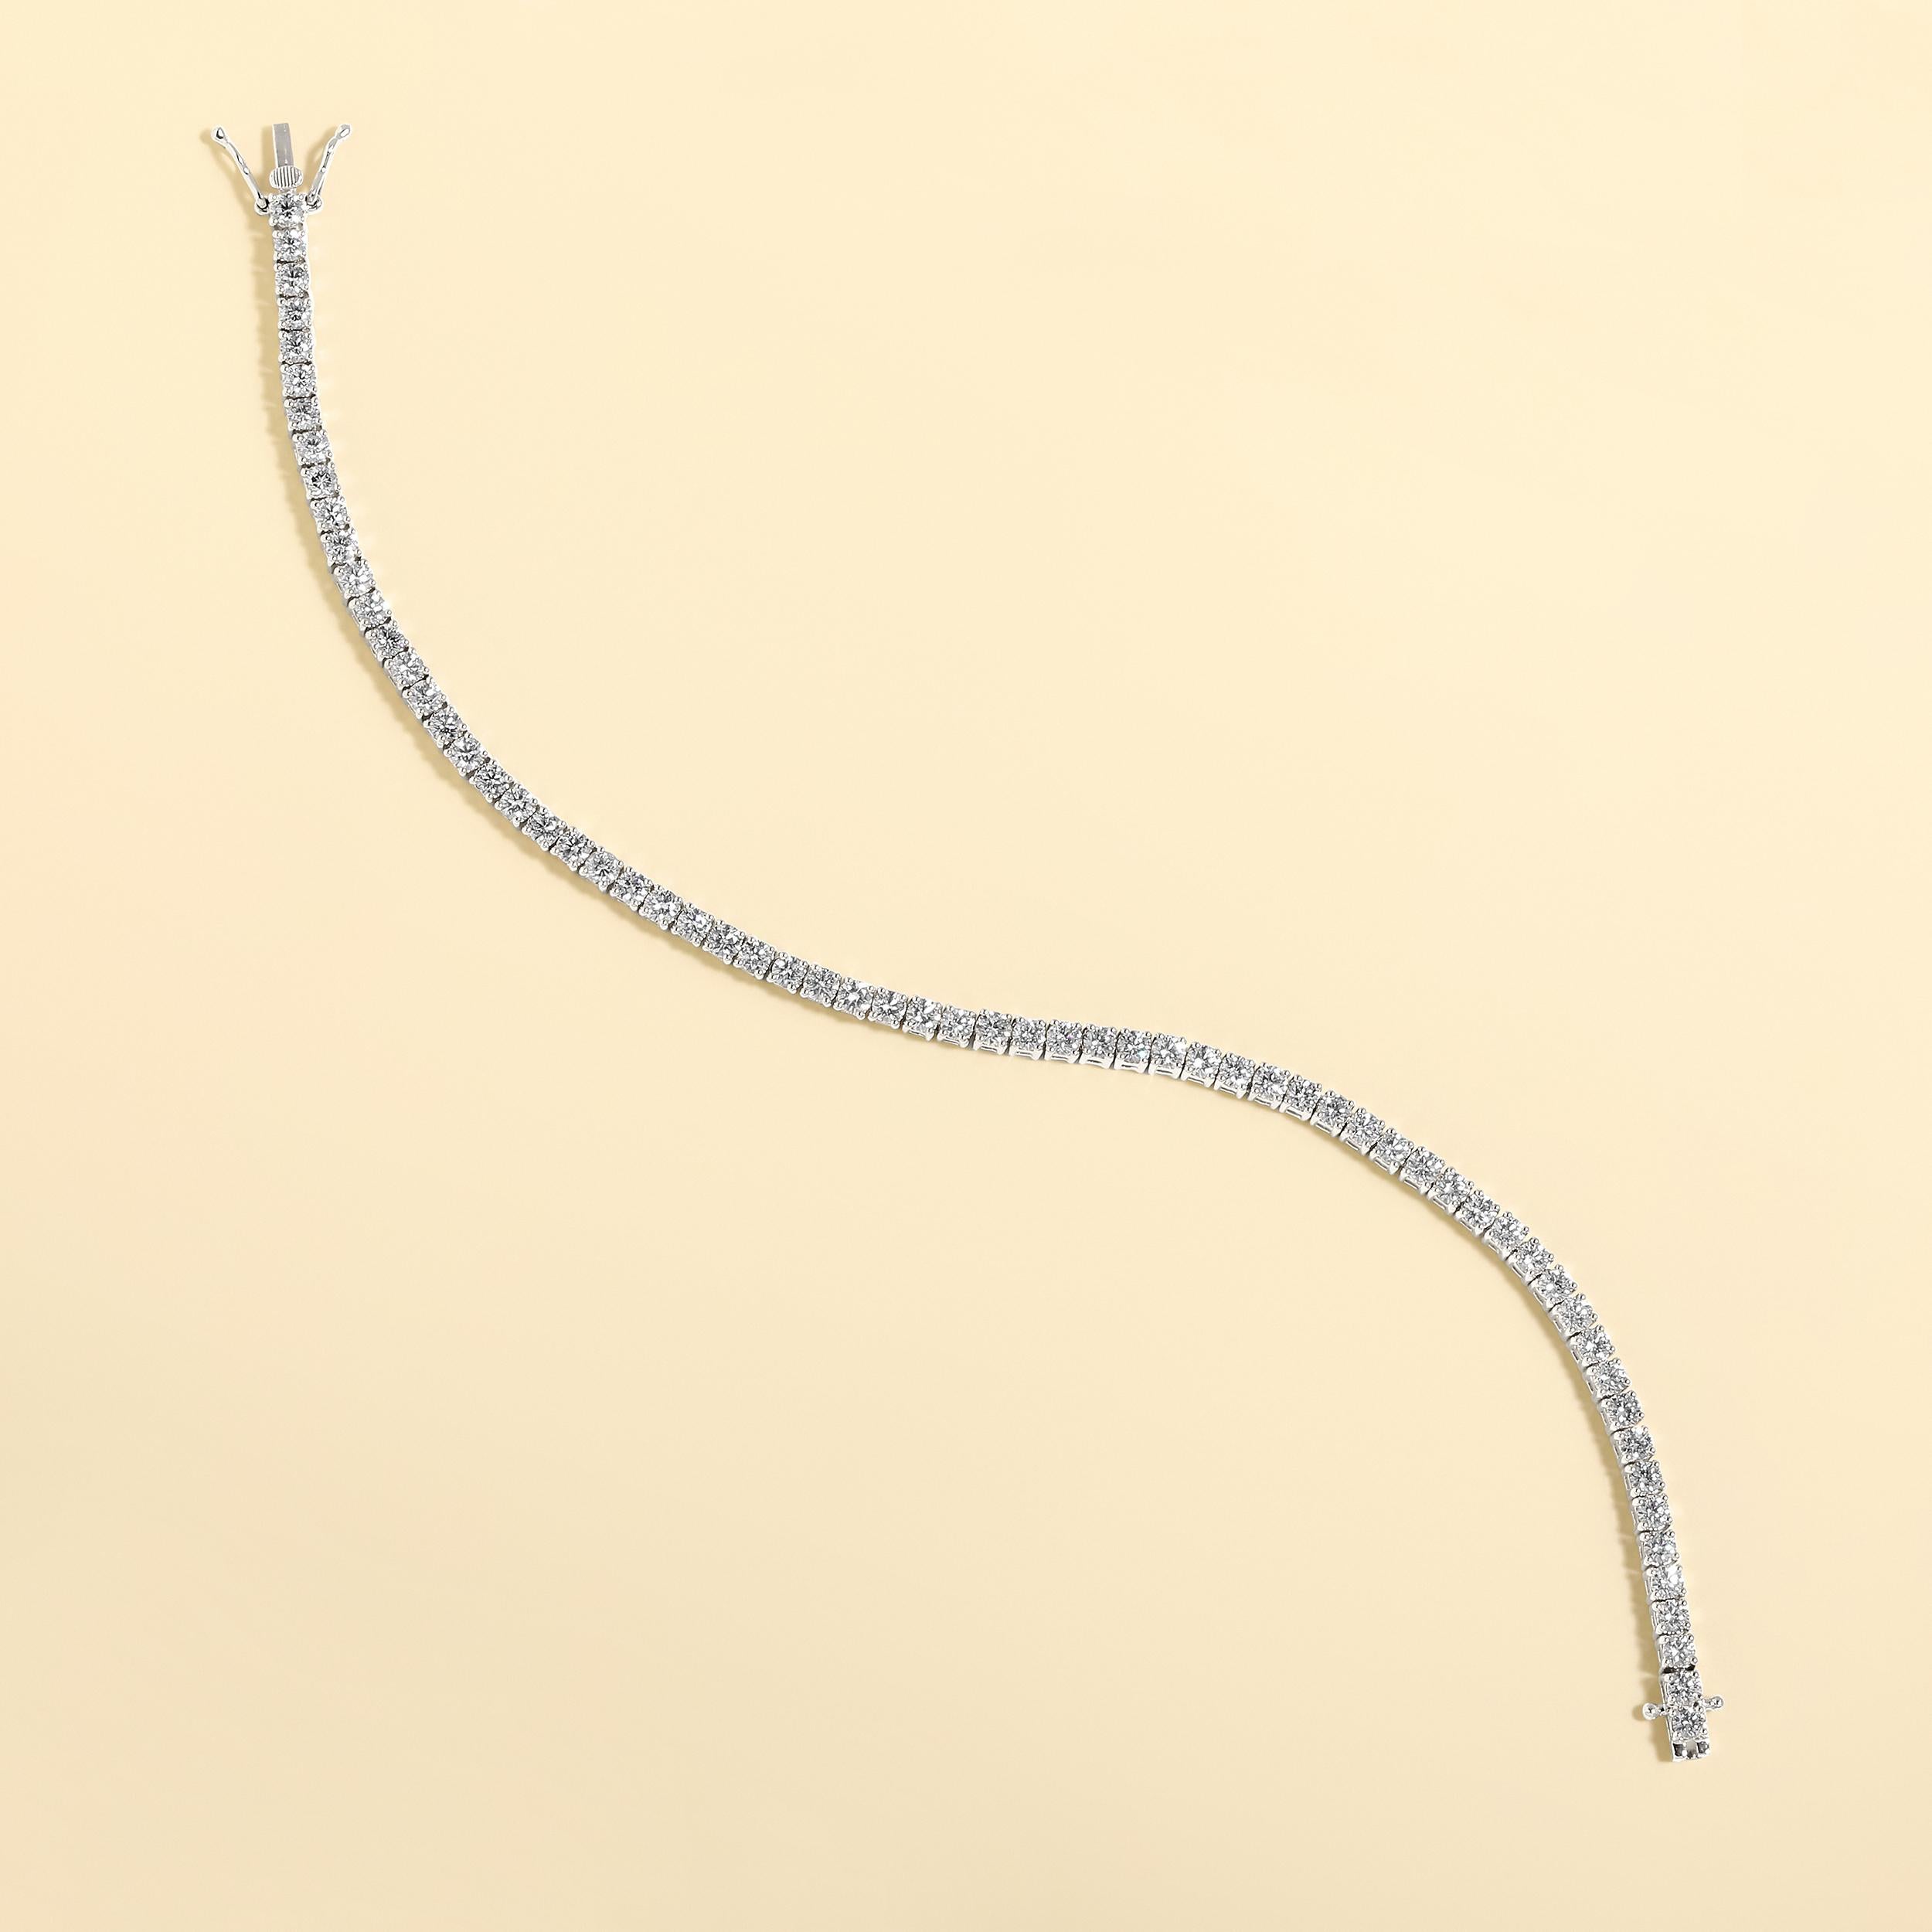 Crafted in 12.12 grams of 14K White Gold, the bracelet contains 61 stones of Round Natural Diamonds with a total of 4.02 carat in G-H color and VS-SI clarity. The bracelet length is 7.5 inches.

CONTEMPORARY AND TIMELESS ESSENCE: Crafted in